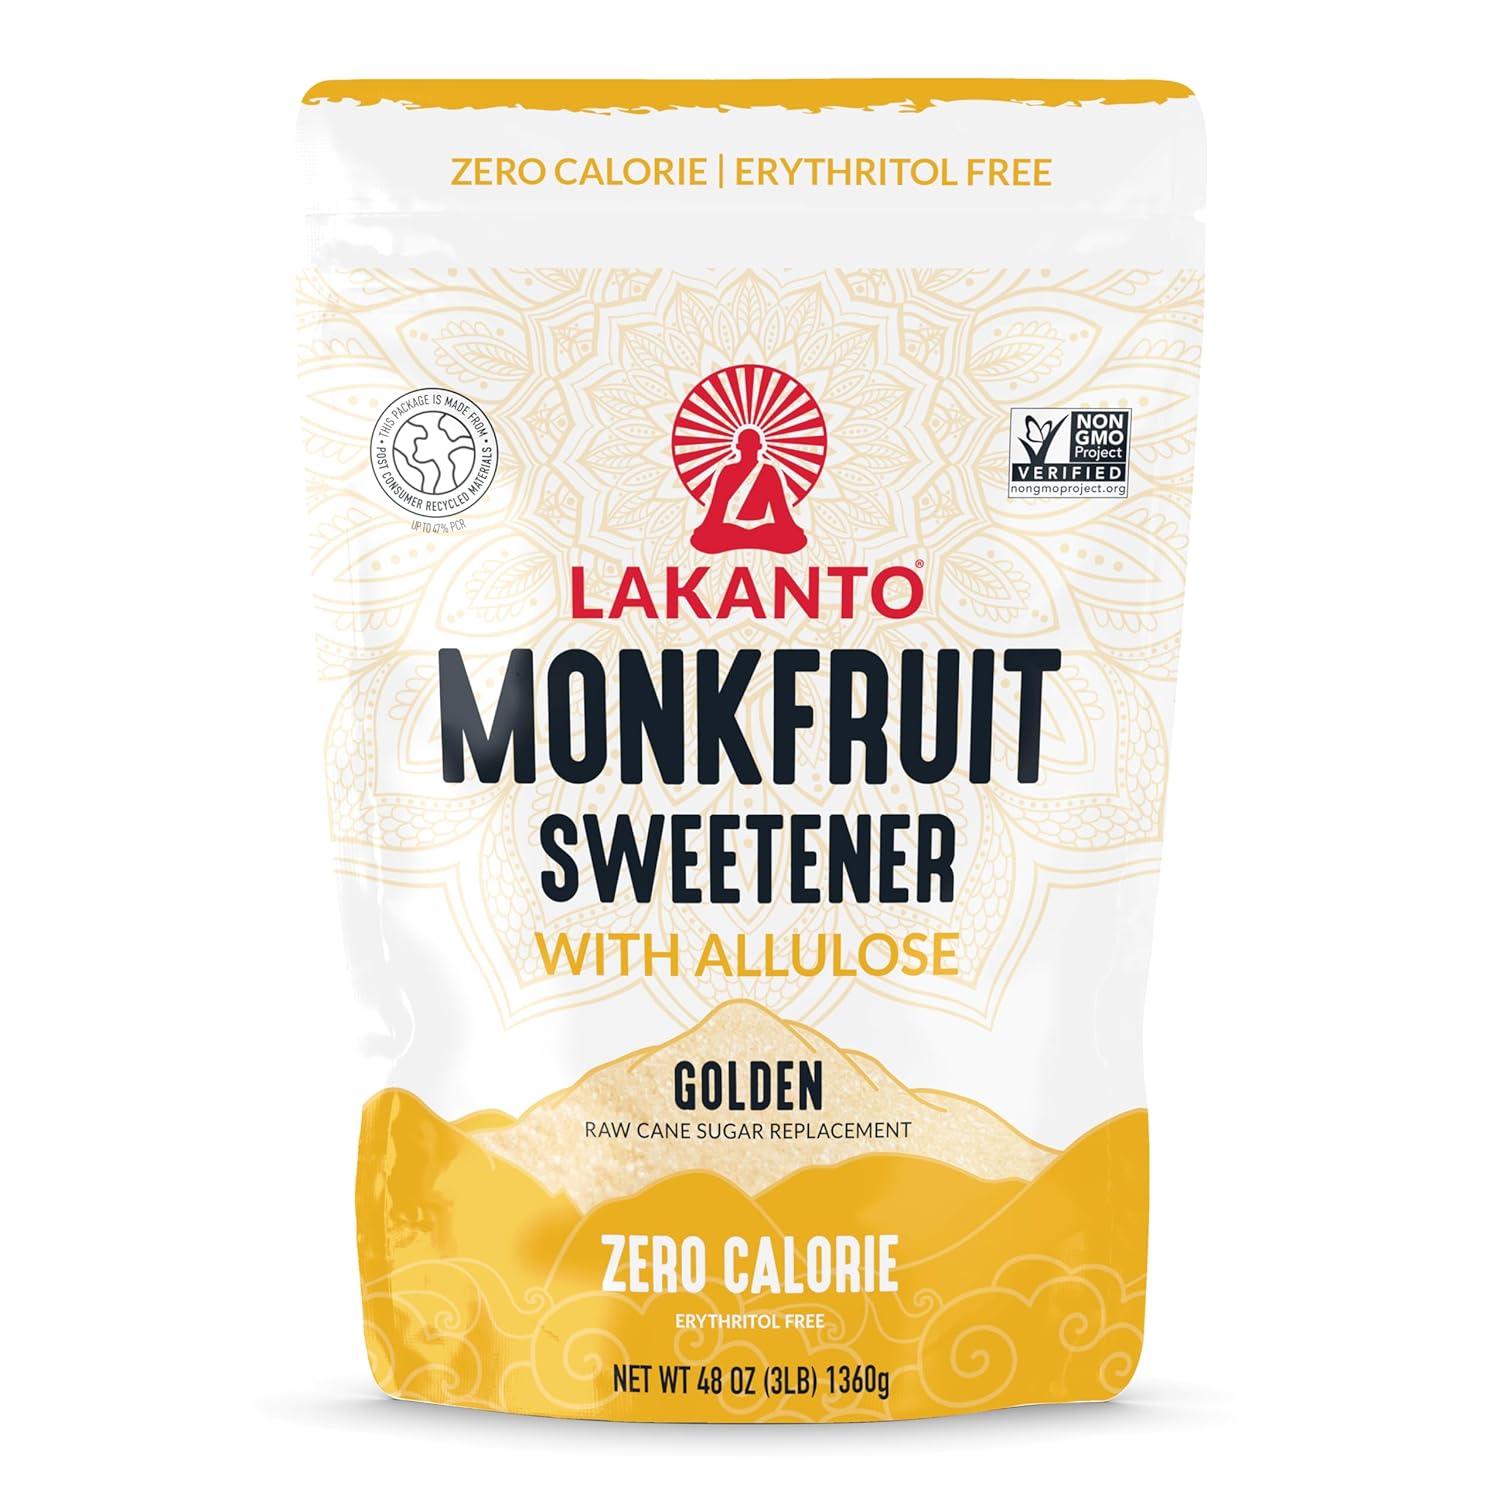 Lakanto Golden Monk Fruit Sweetener with Allulose - Raw Cane Sugar Substitute, Erythritol Free, Gluten Free, Vegan, Keto Friendly, Sugar Replacement (Golden - 3 lb - Pack of 1)